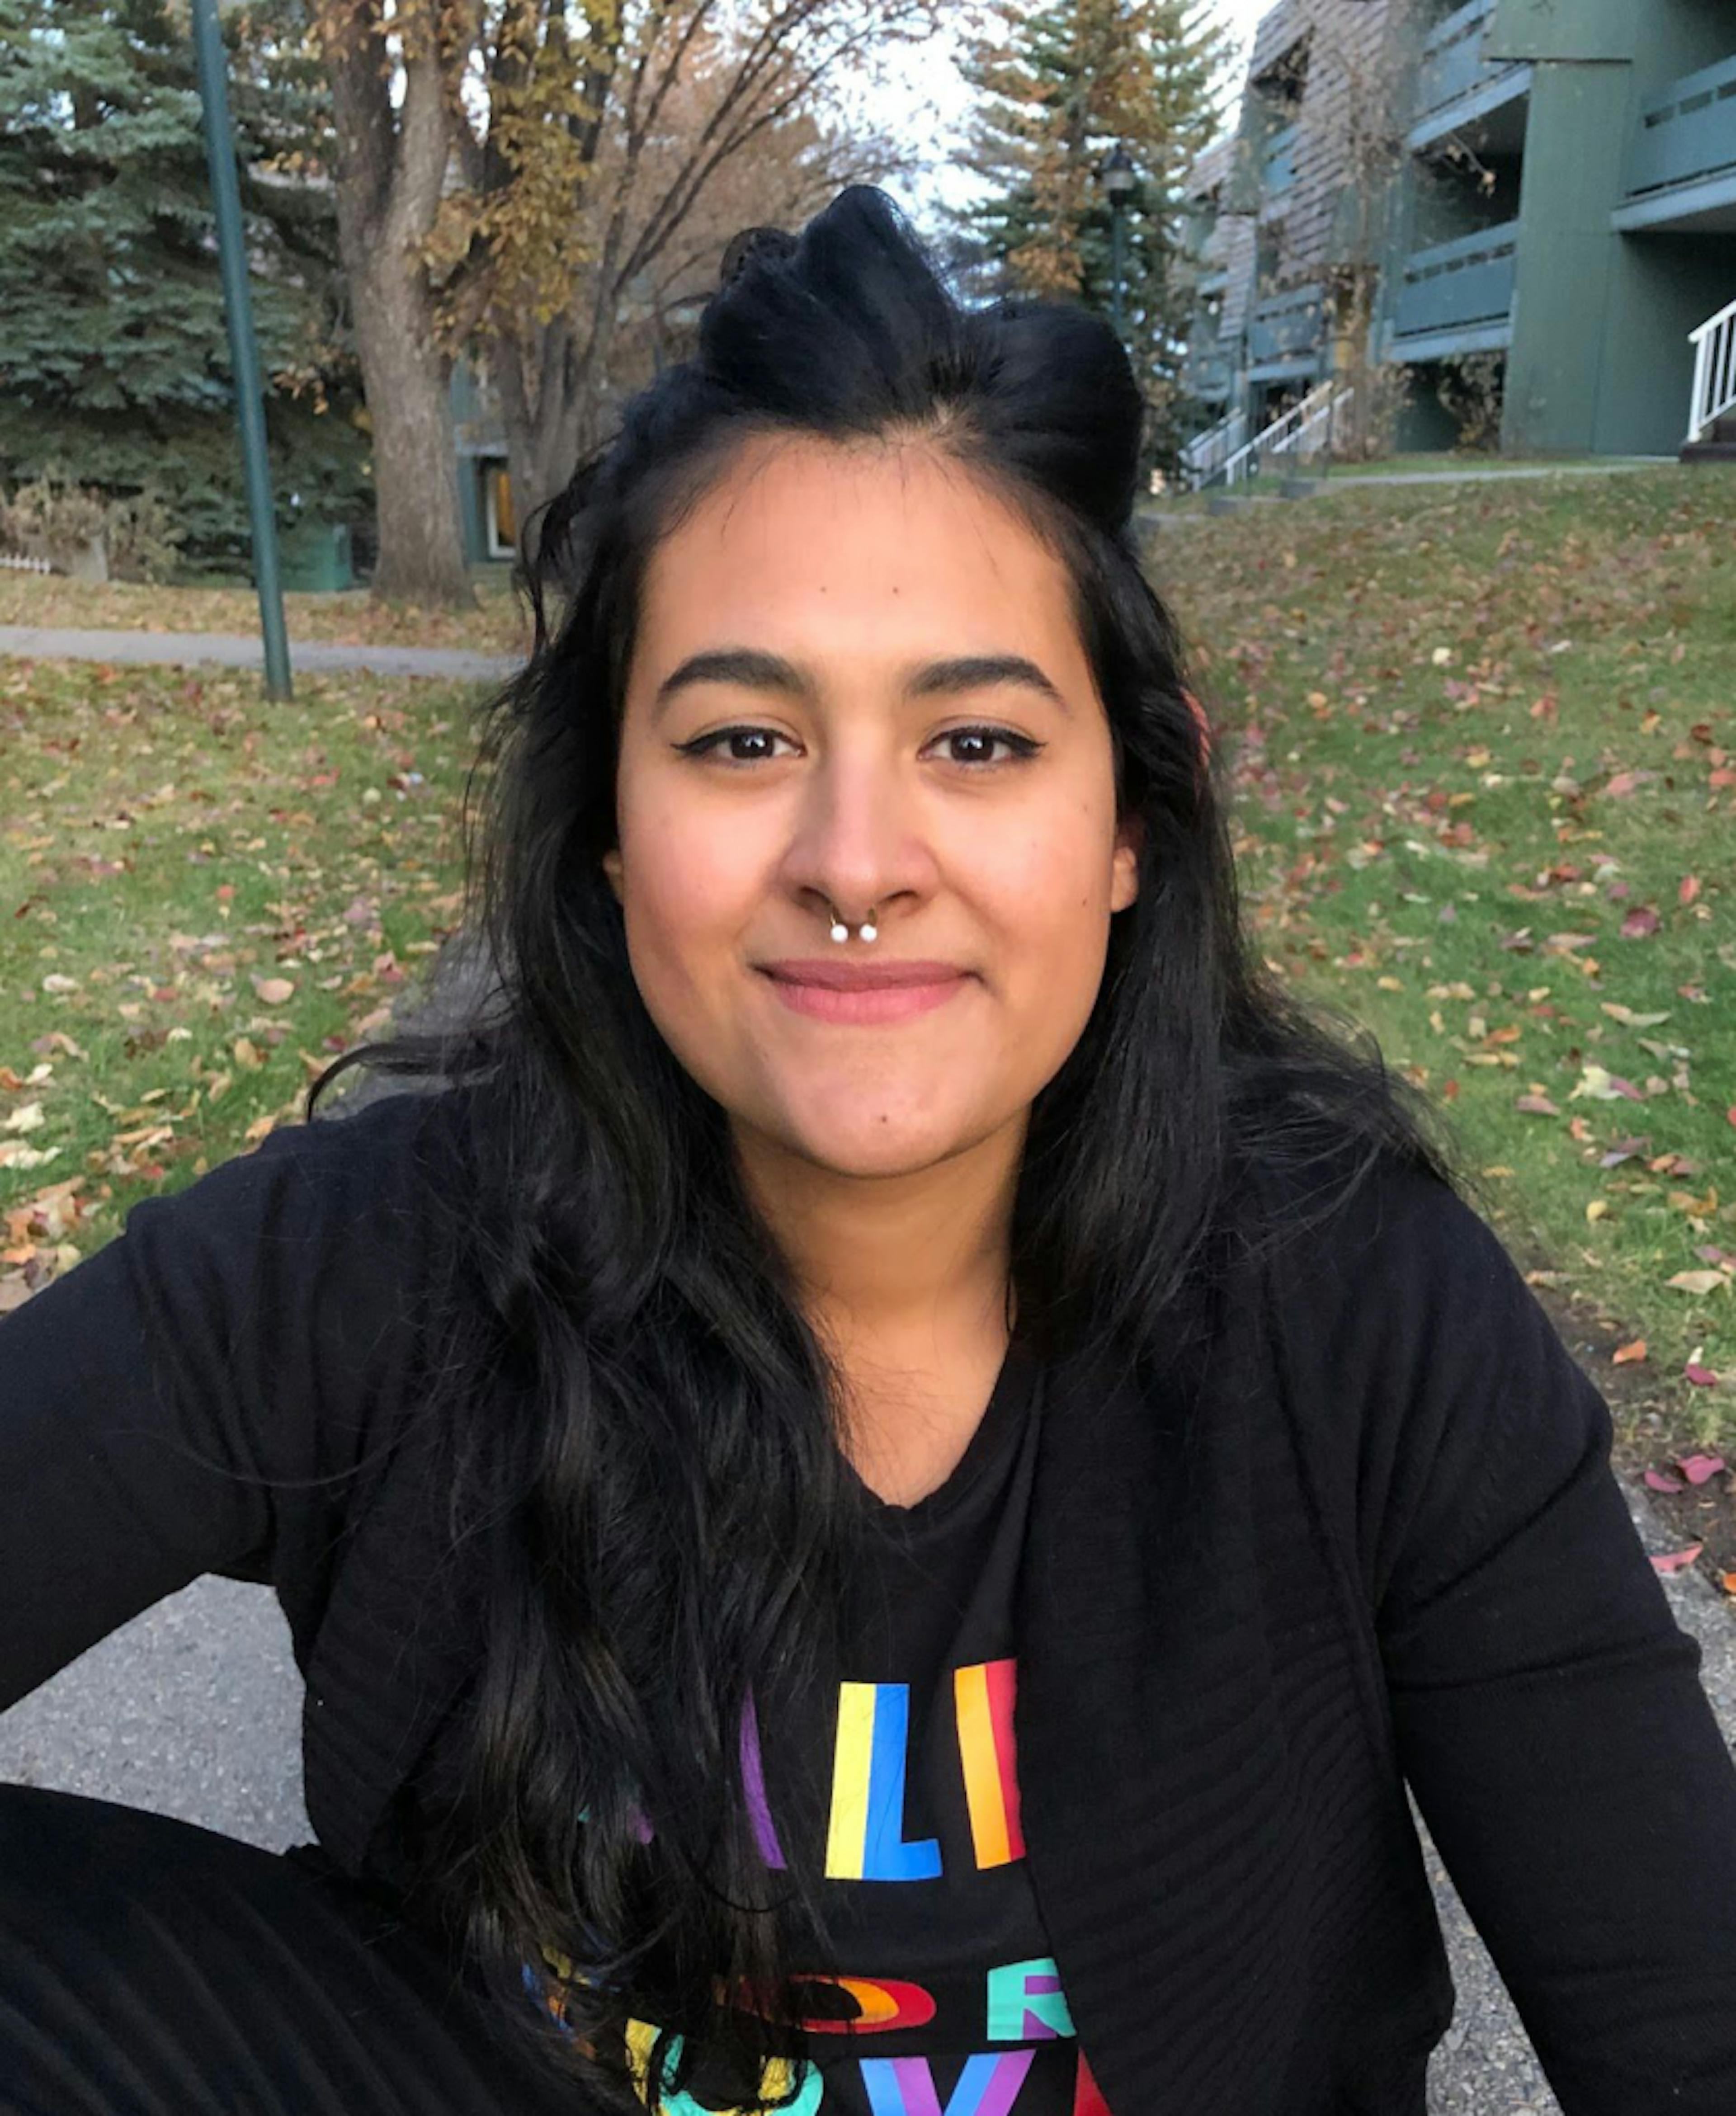 profile picture of Ana Victoria Pinero - 2019-21 CJM Scholarship Winner. She is of Venezuelan decent, with long black hair. She is smiling at the camera. She has brown eyes, a nose ring, and is wearing a black shirt with colourful text on it. 